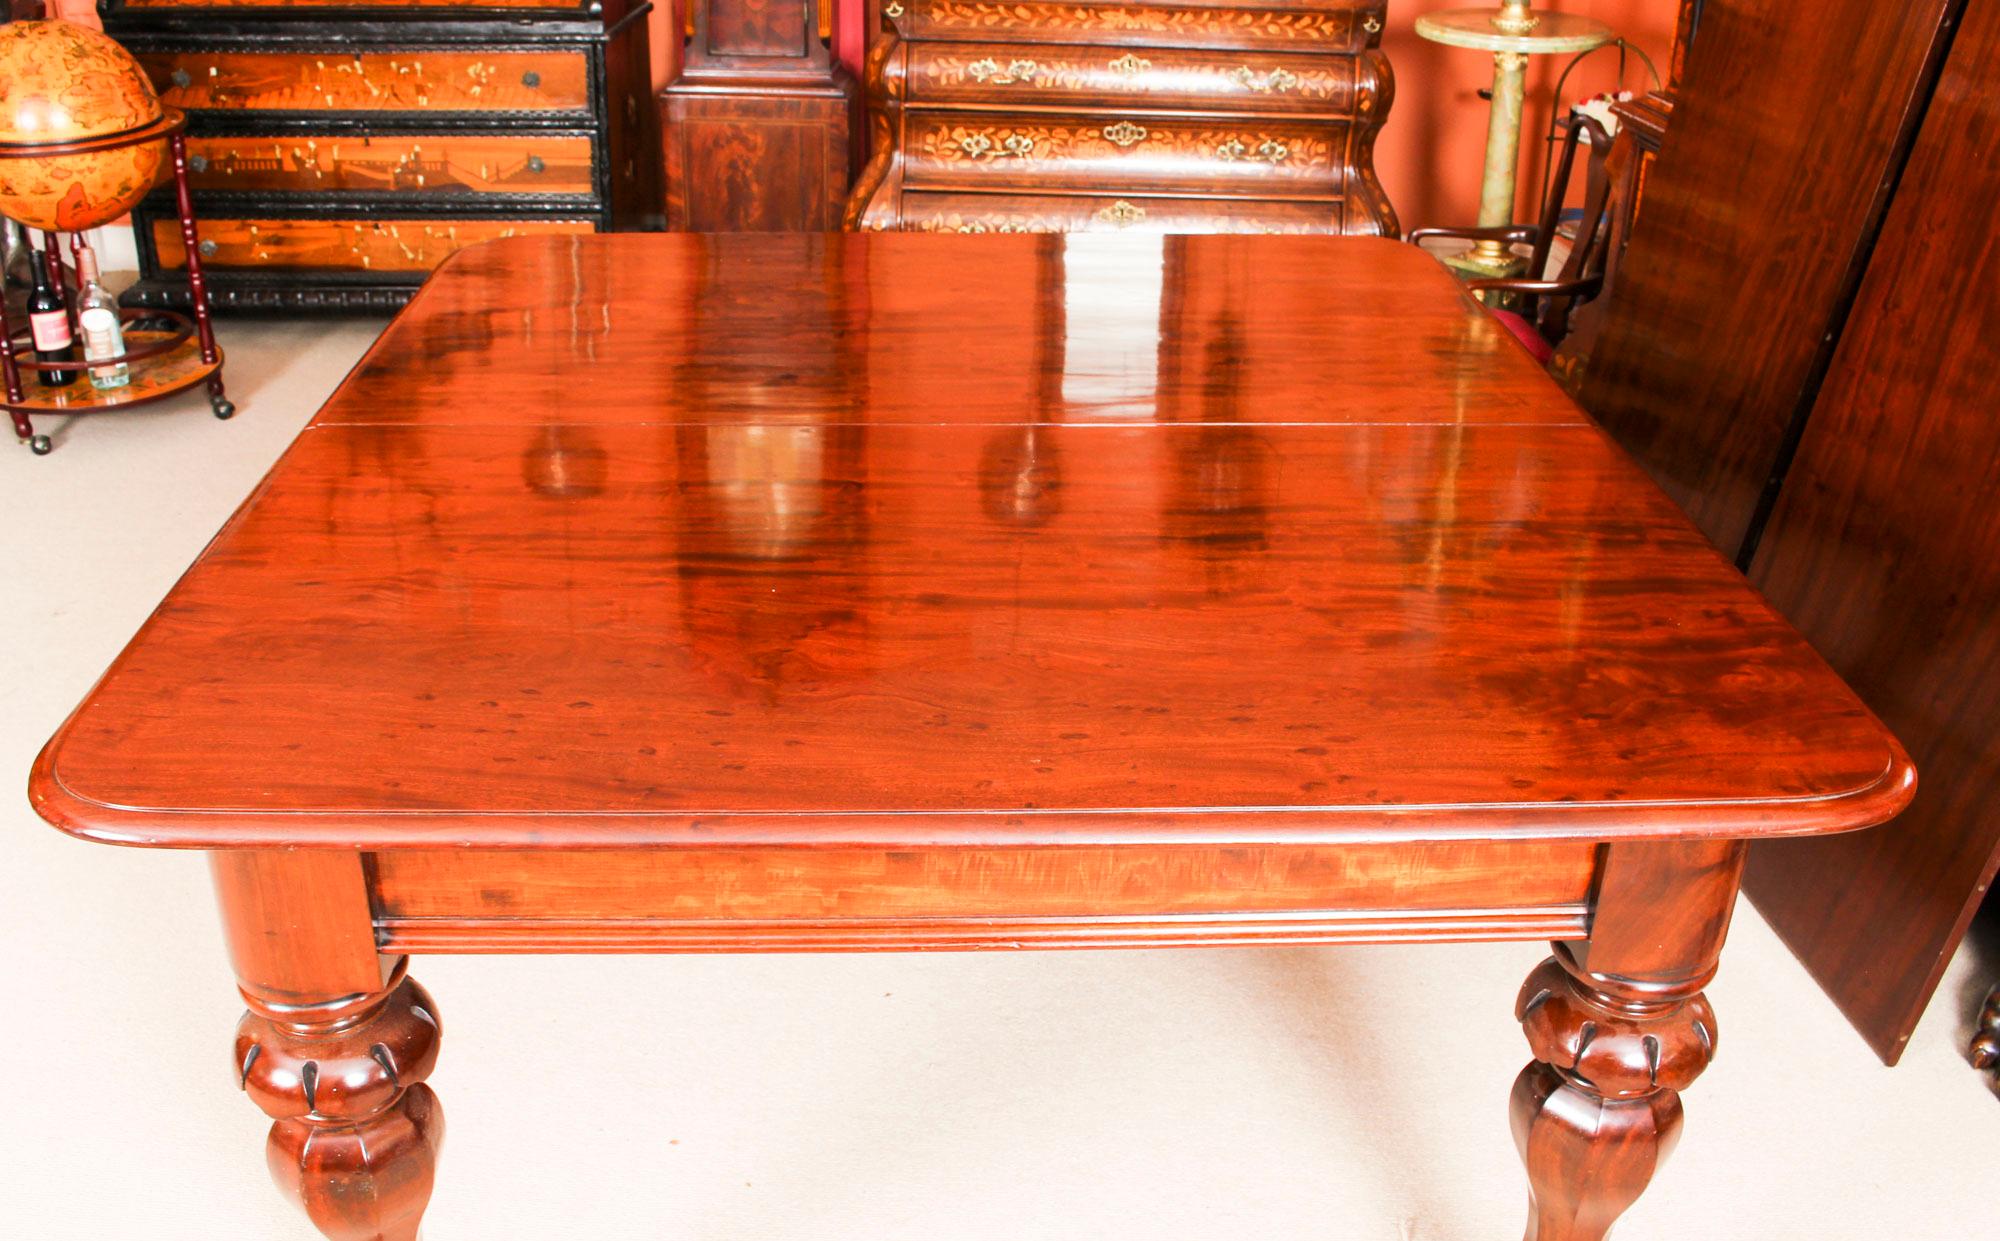 1800s dining room furniture